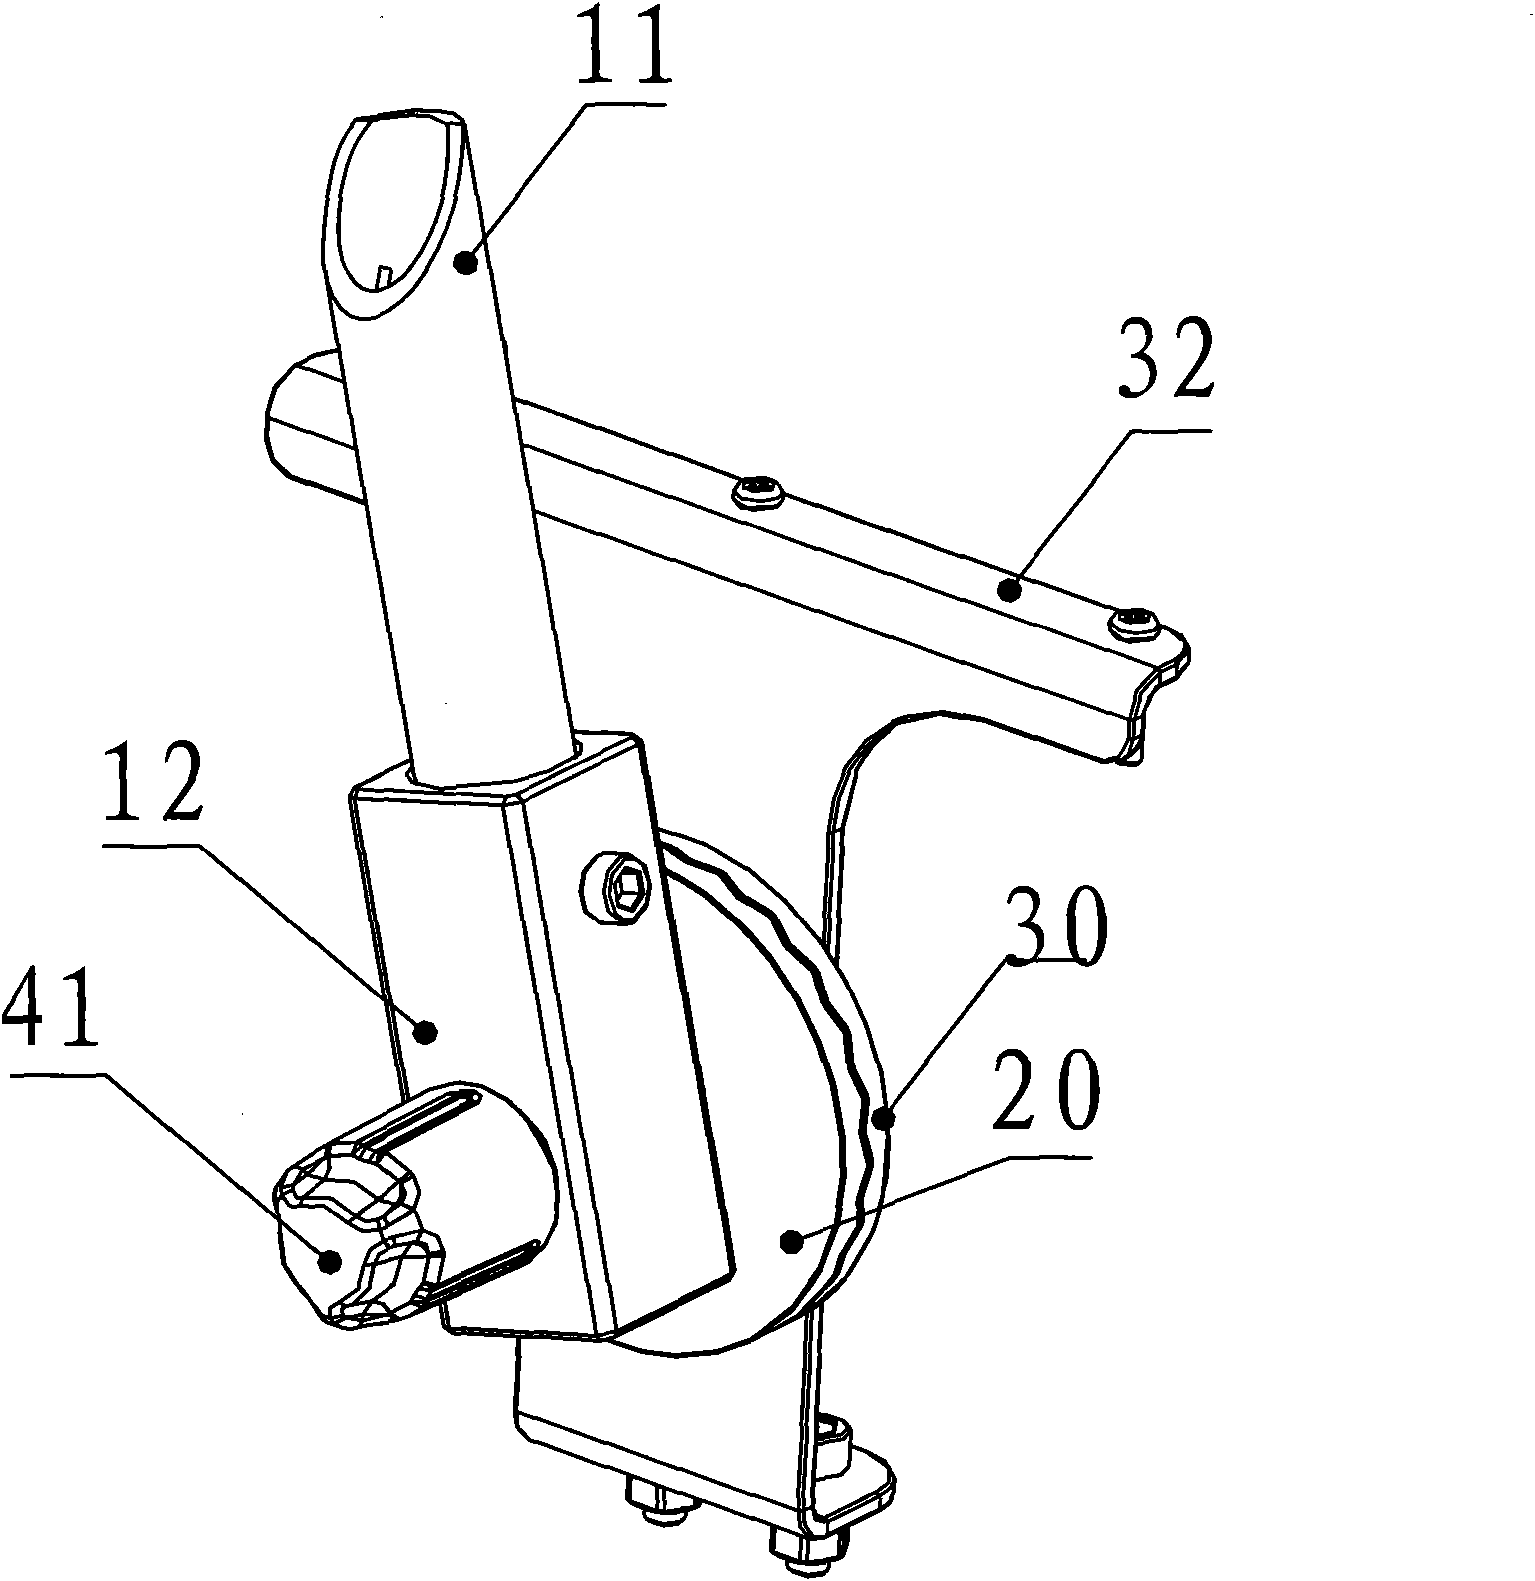 Lamp fixing device capable of adjusting illumination angle and lamp